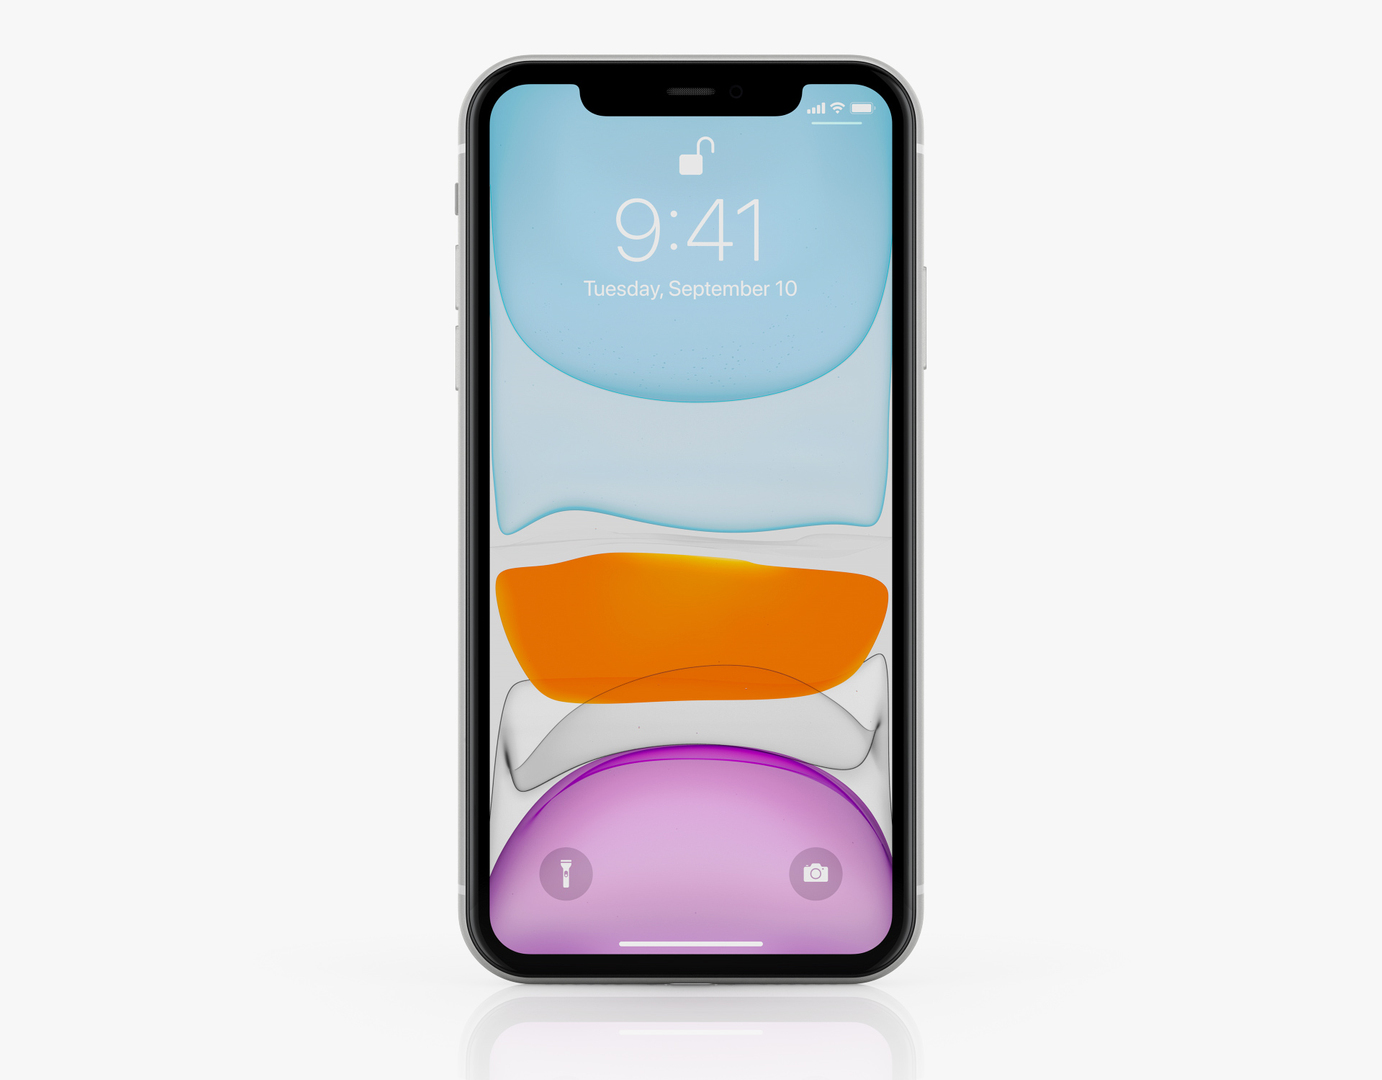 apple iphone 11 color model https://p.turbosquid.com/ts-thumb/7g/G5nufe/W2UyW4Is/iphone11white/jpg/1568916301/1920x1080/turn_fit_q99/18696523b7c4d8b14a887bf23f2d97228613550d/iphone11white-1.jpg